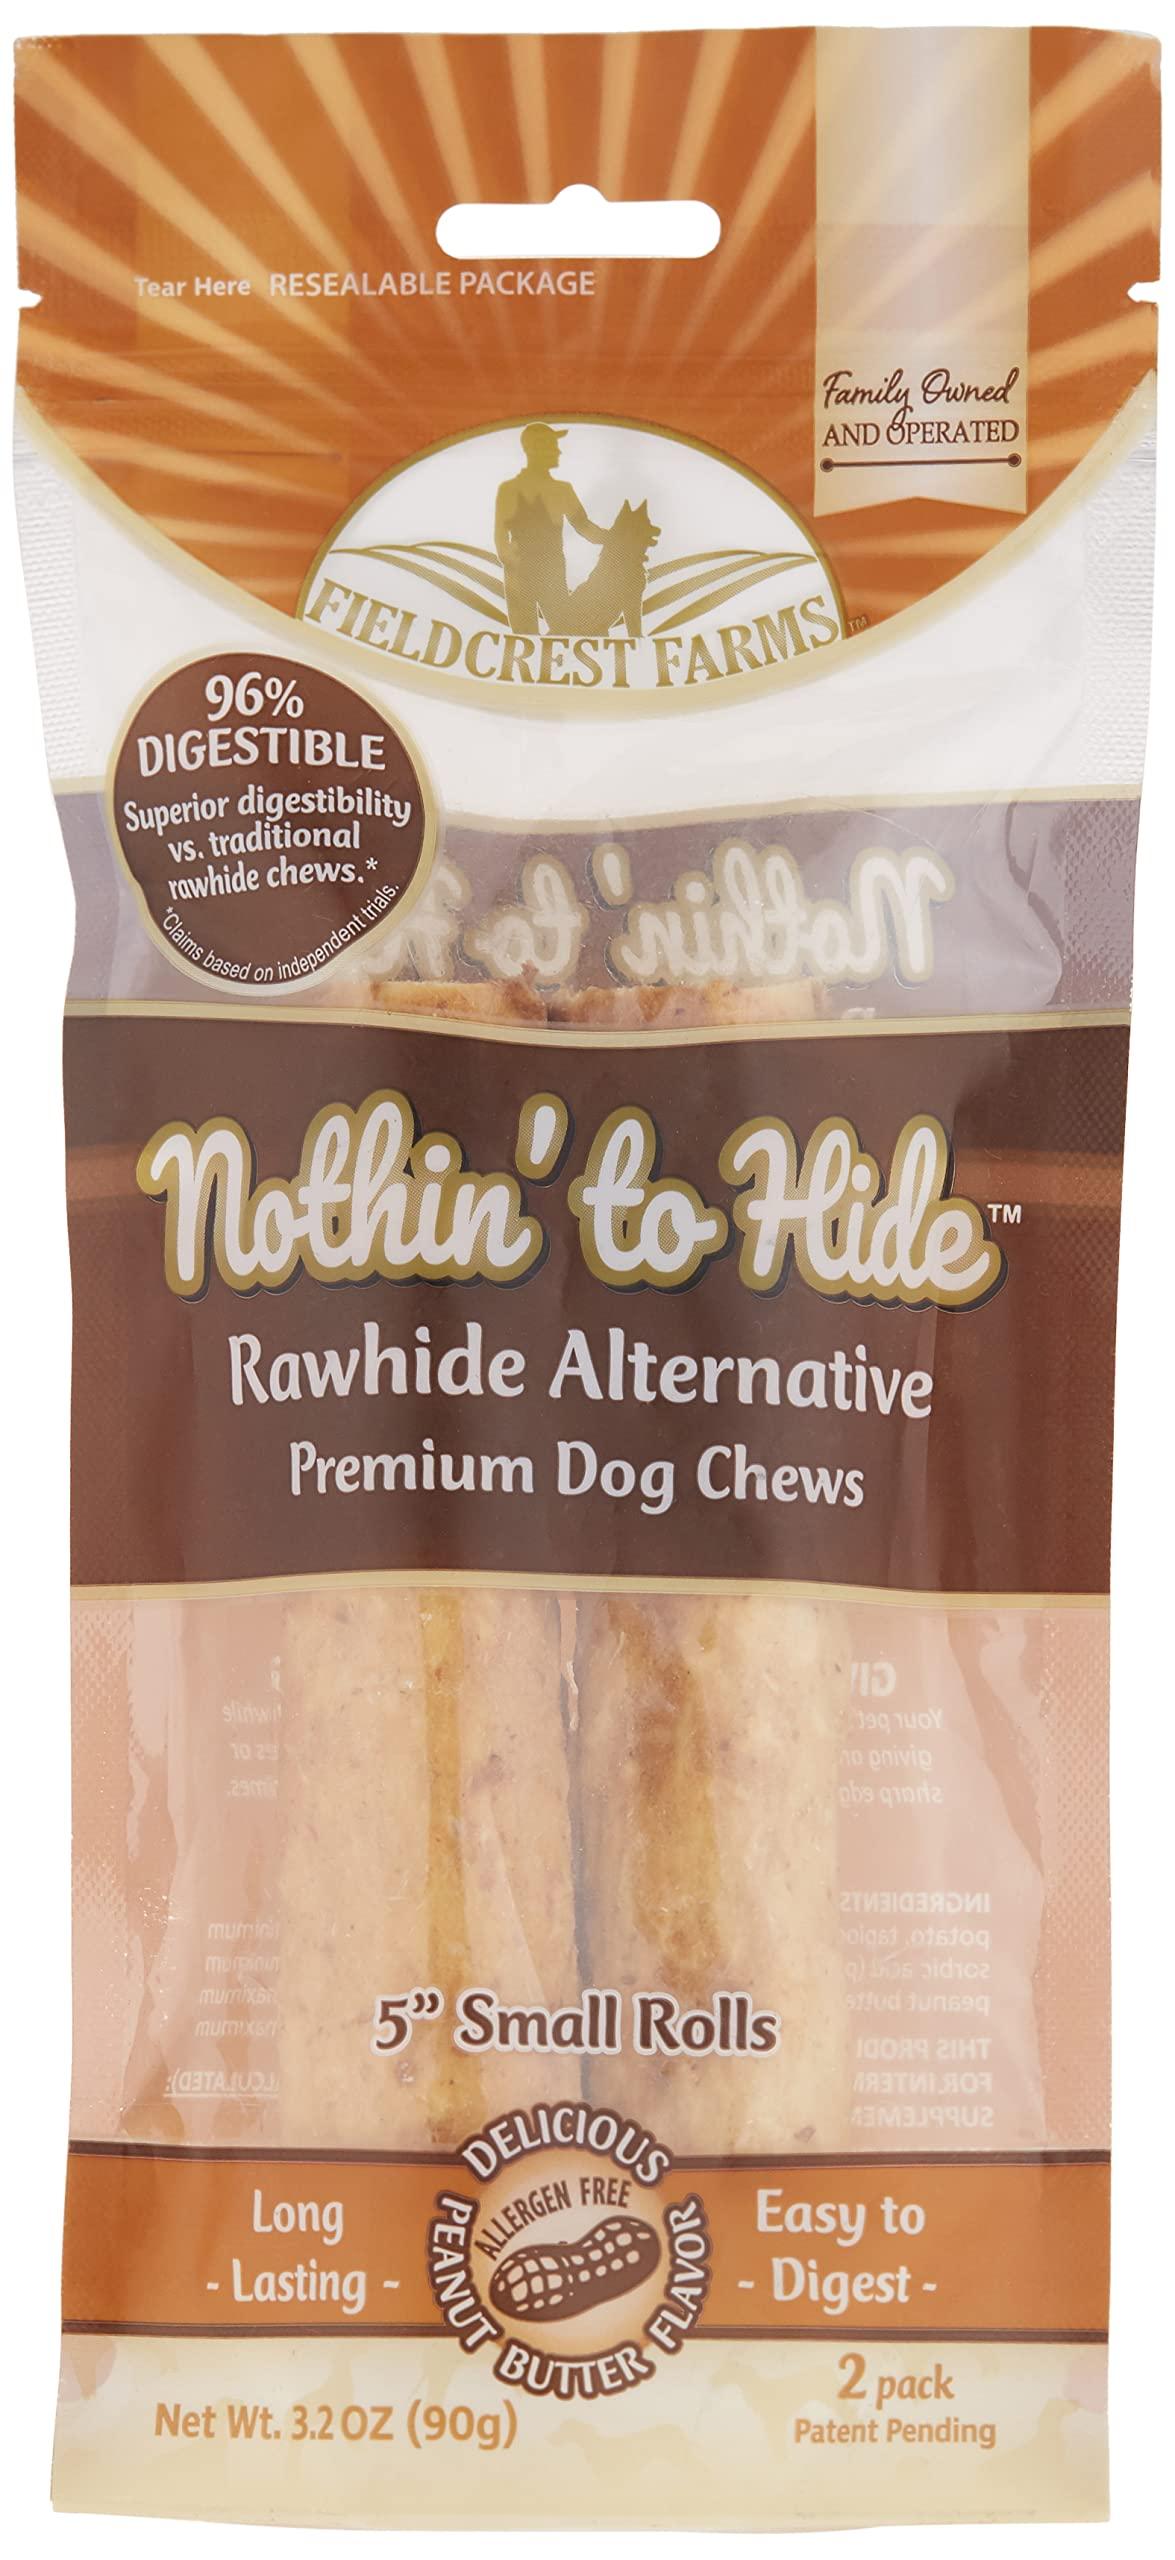 Fieldcrest Farms Nothin' to Hide 5 Small Roll Peanut Butter Flavored Dog Chew, 3.2 oz., Count of 2